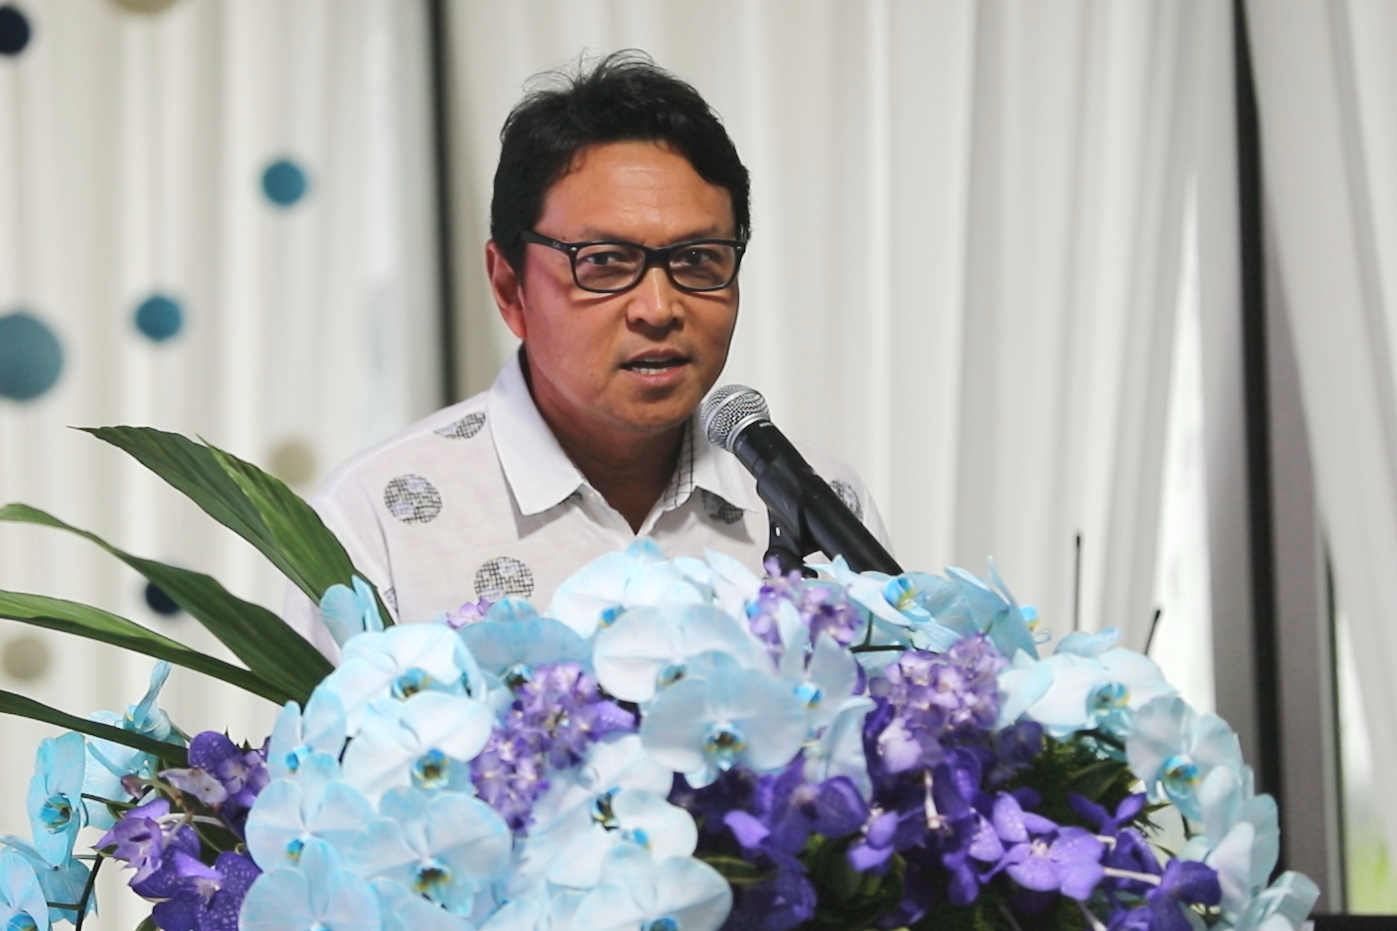 Mr. Tanes Petsuwan, Tourism Authority of Thailand's (TAT) Deputy Governor for Marketing Communications speaking at a press conference on the opening day of the Thailand Travel Mart Plus (TTM+) 2019 in Pattaya. Click to enlarge.